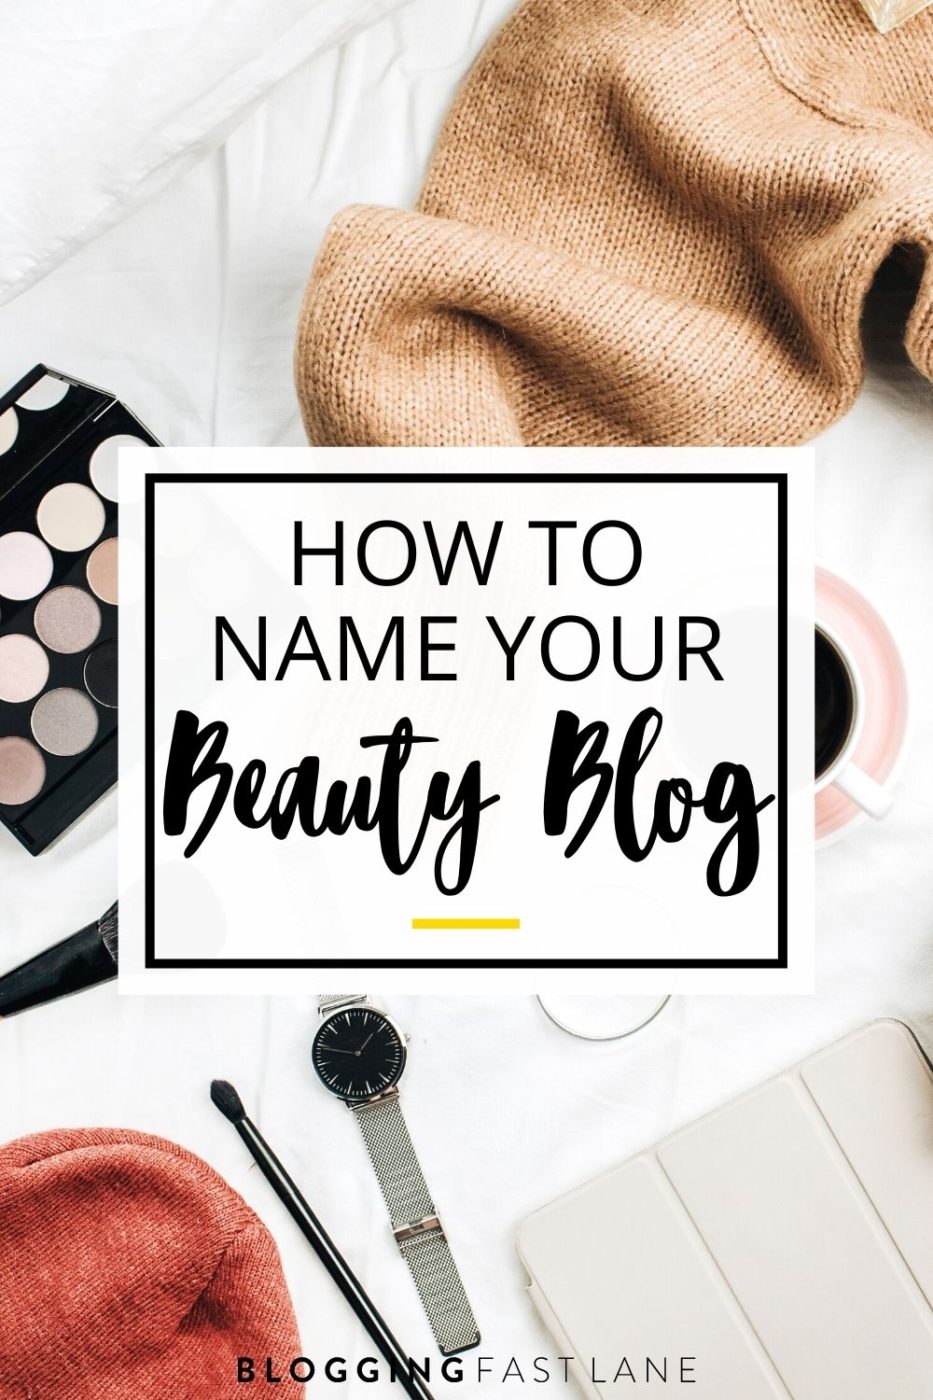 Beauty Blog Names | If you're starting a beauty blog, you have to have the perfect name to go along with it. Check out these 100 beauty blog name ideas and examples, plus tips on how to name your blog!